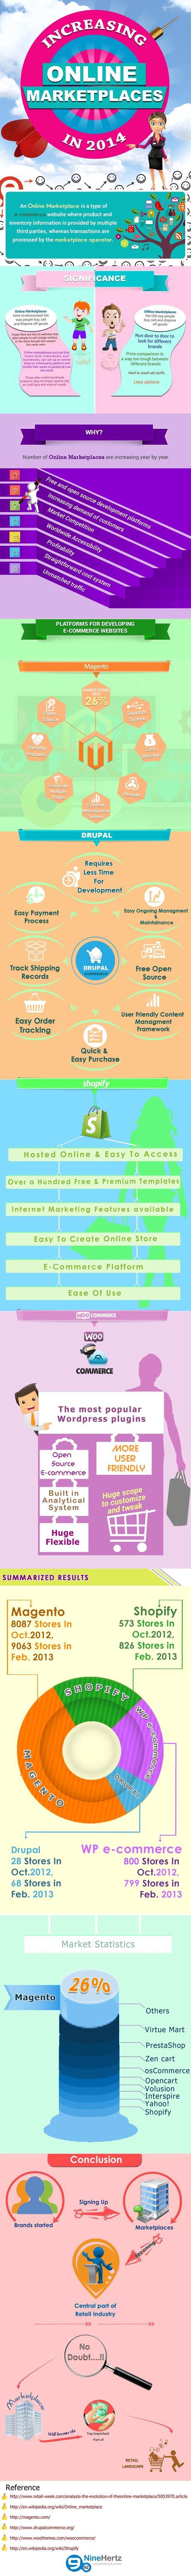 How to Build Own Online Marketplace?